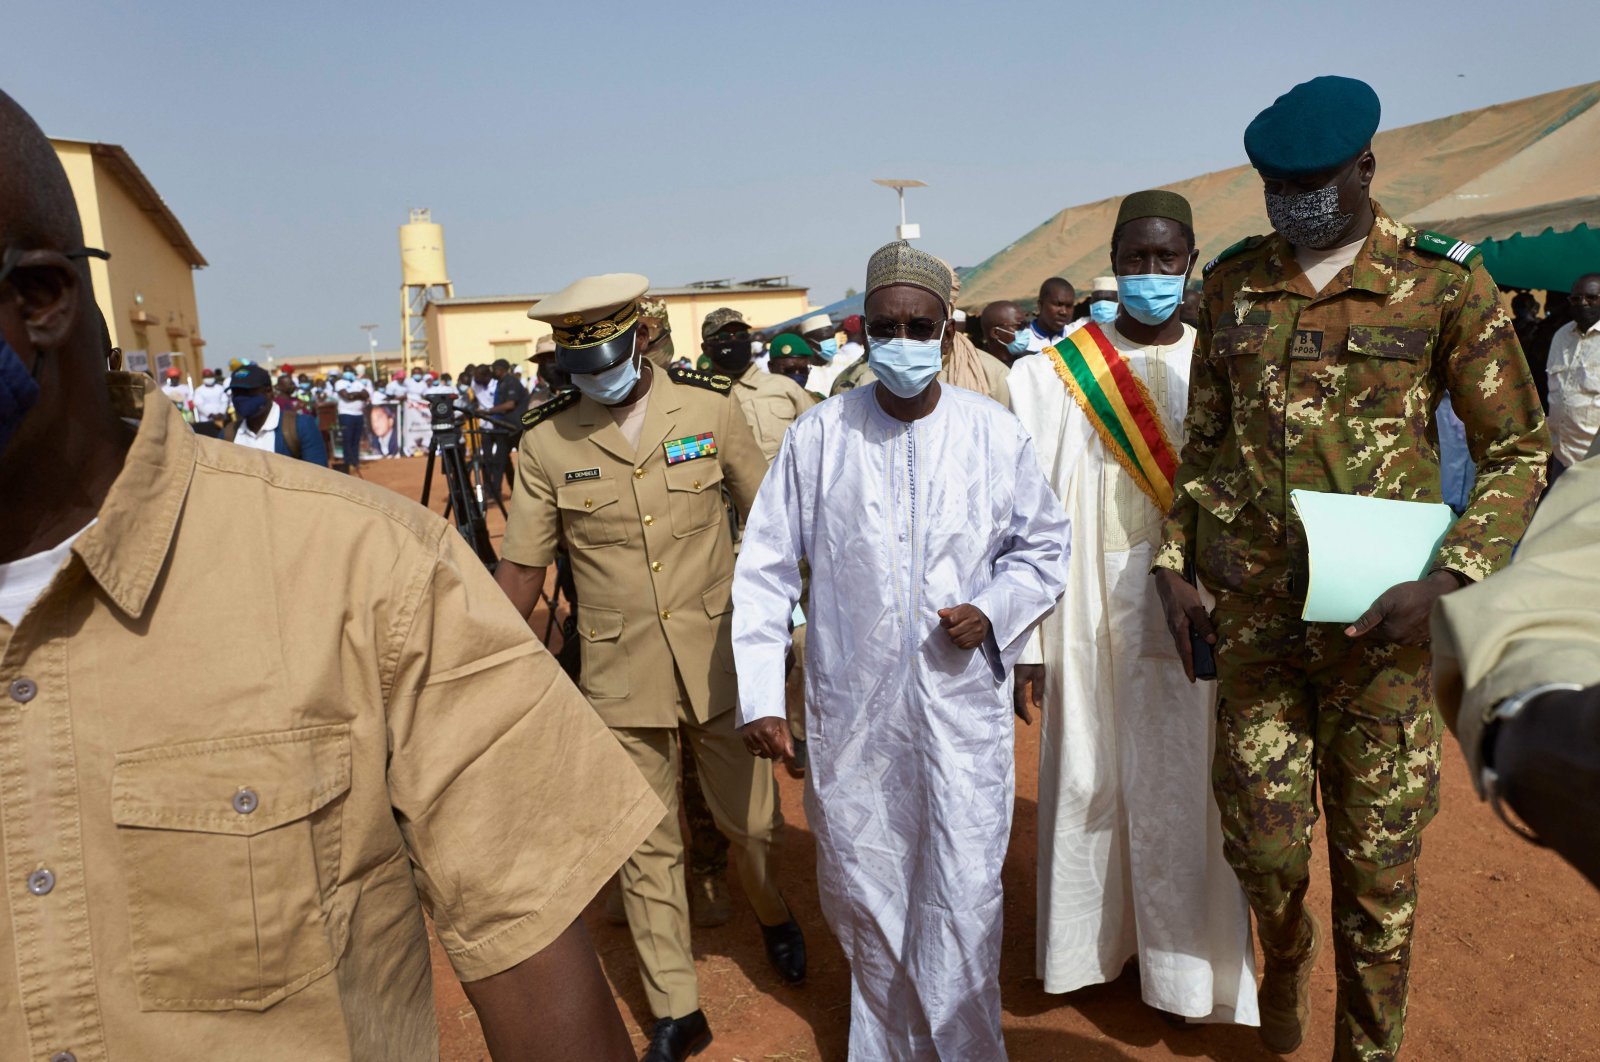 Mali's interim leaders arrested in the second military